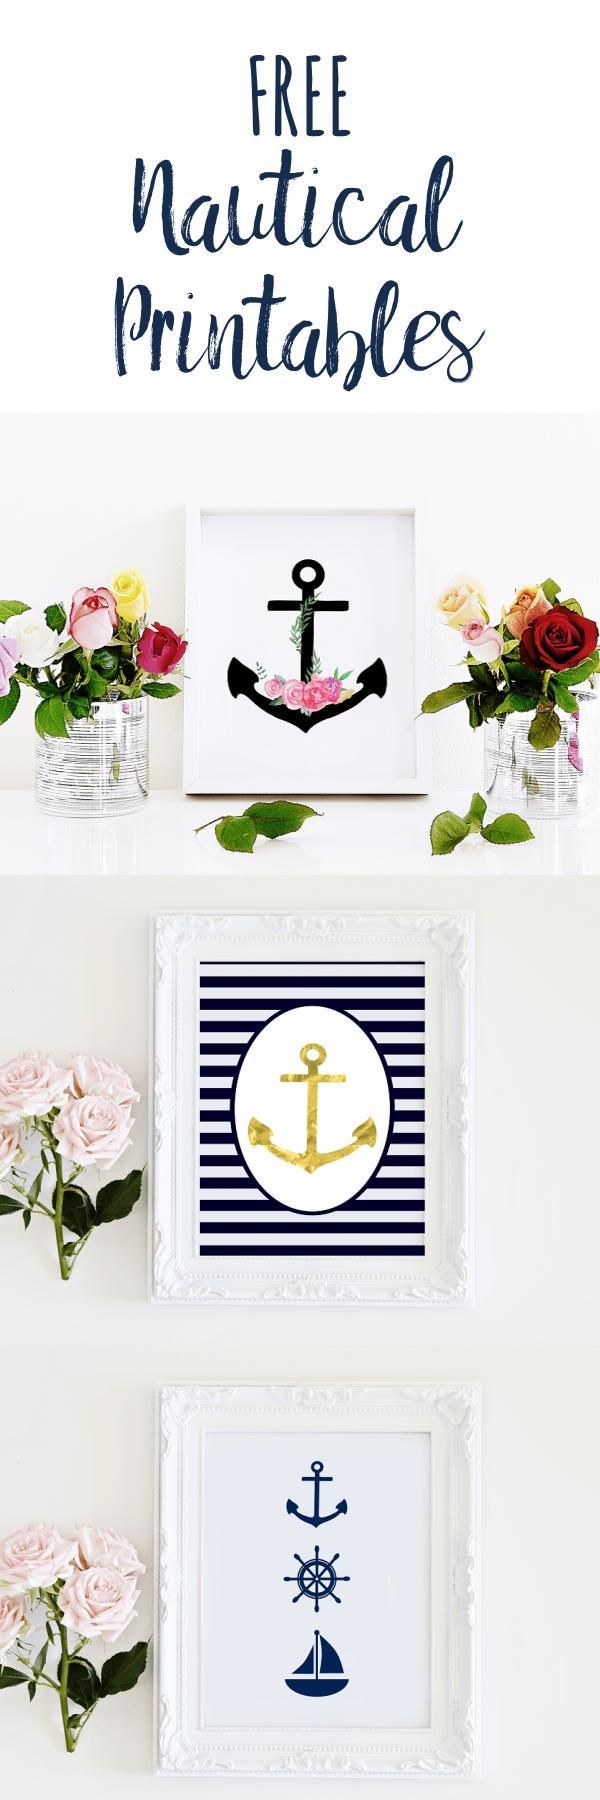 Free nautical printables to add to your wall decor. Prints come in navy and white and black and white. Multiple anchor and